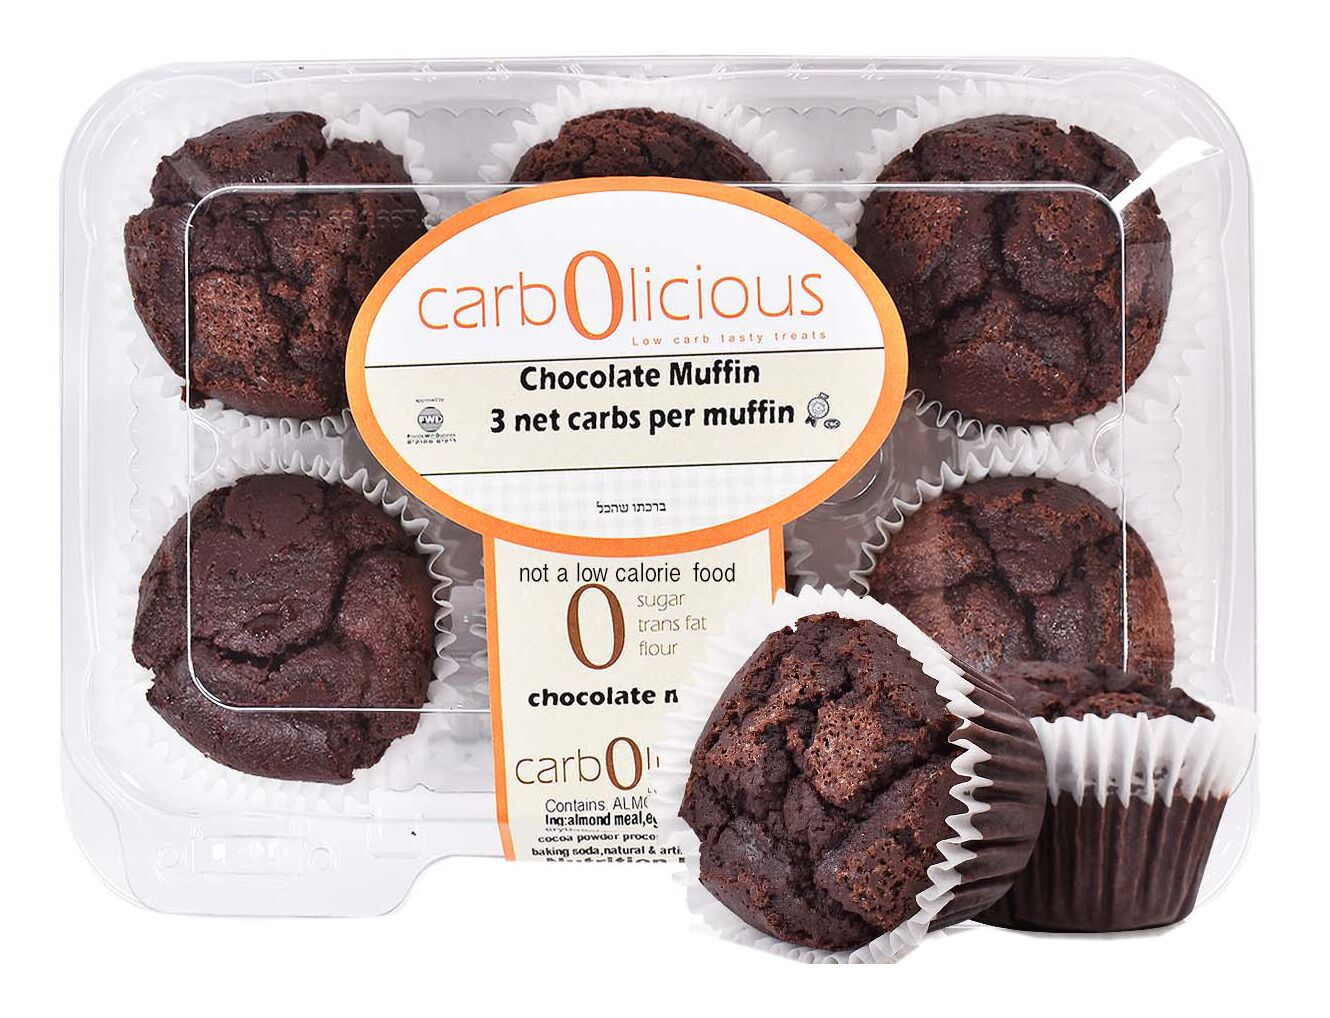 #Flavor_Chocolate #Size_One Pack (6 Muffins)